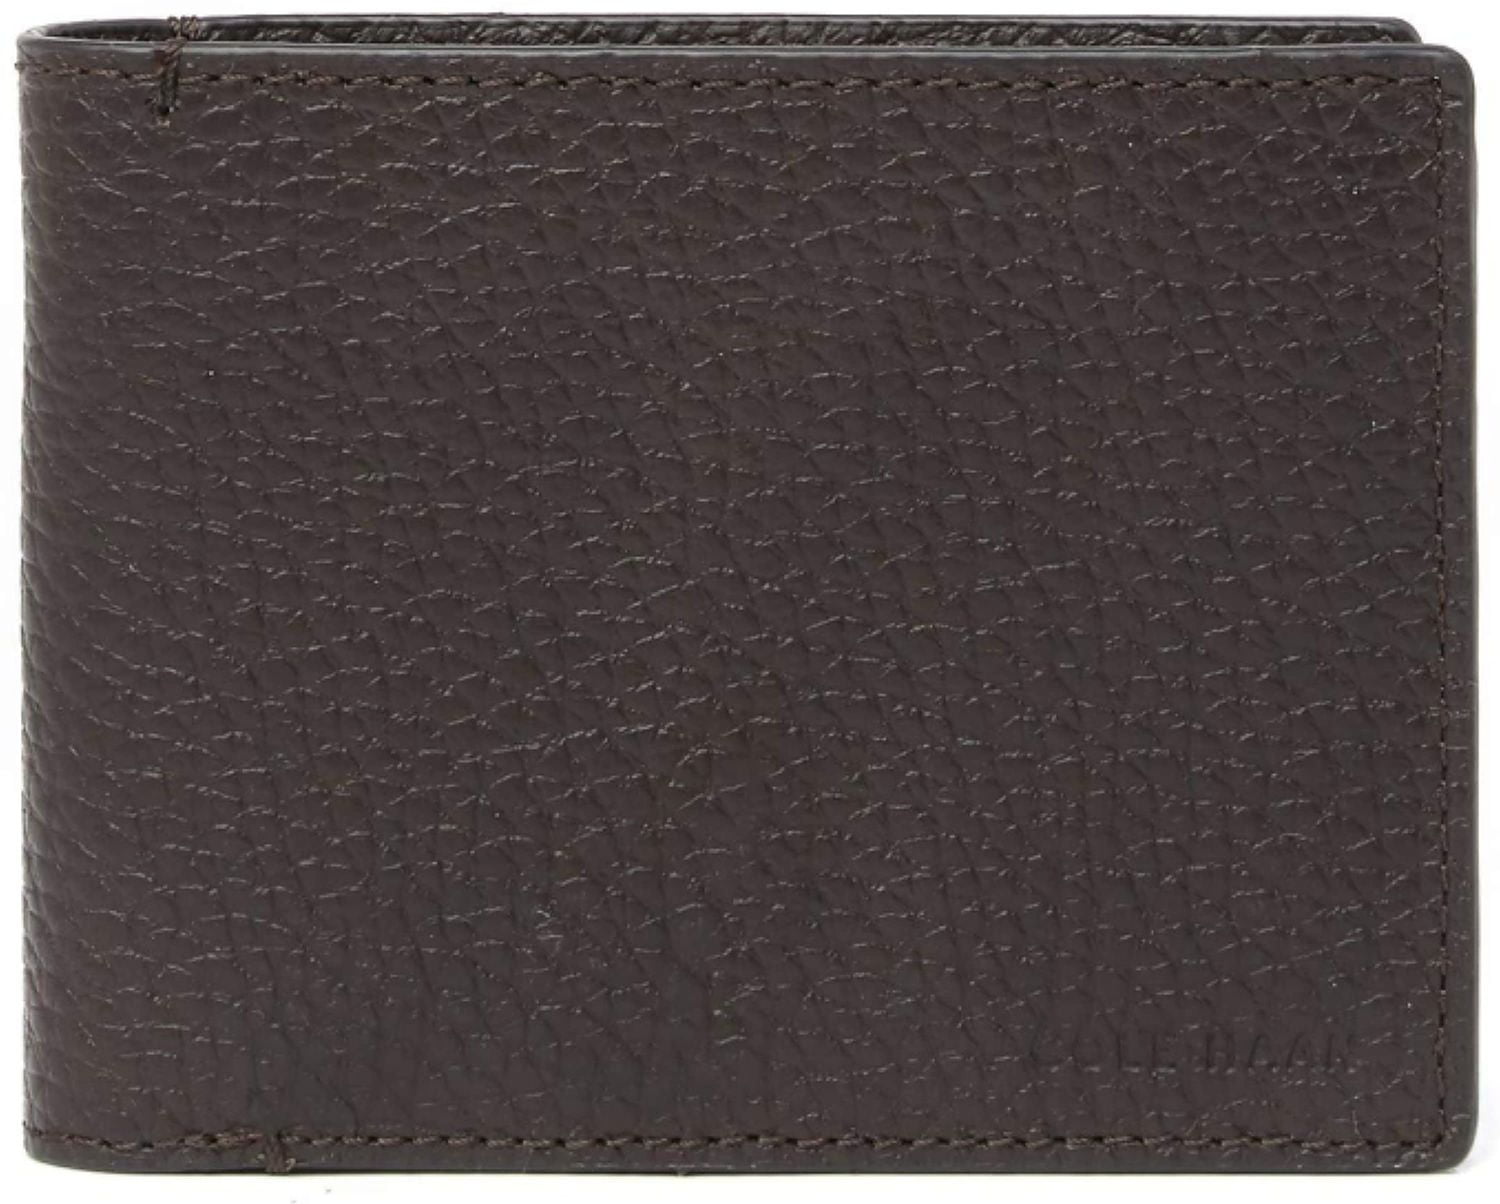 What Grain of Leather is Cole Haan Wallet?